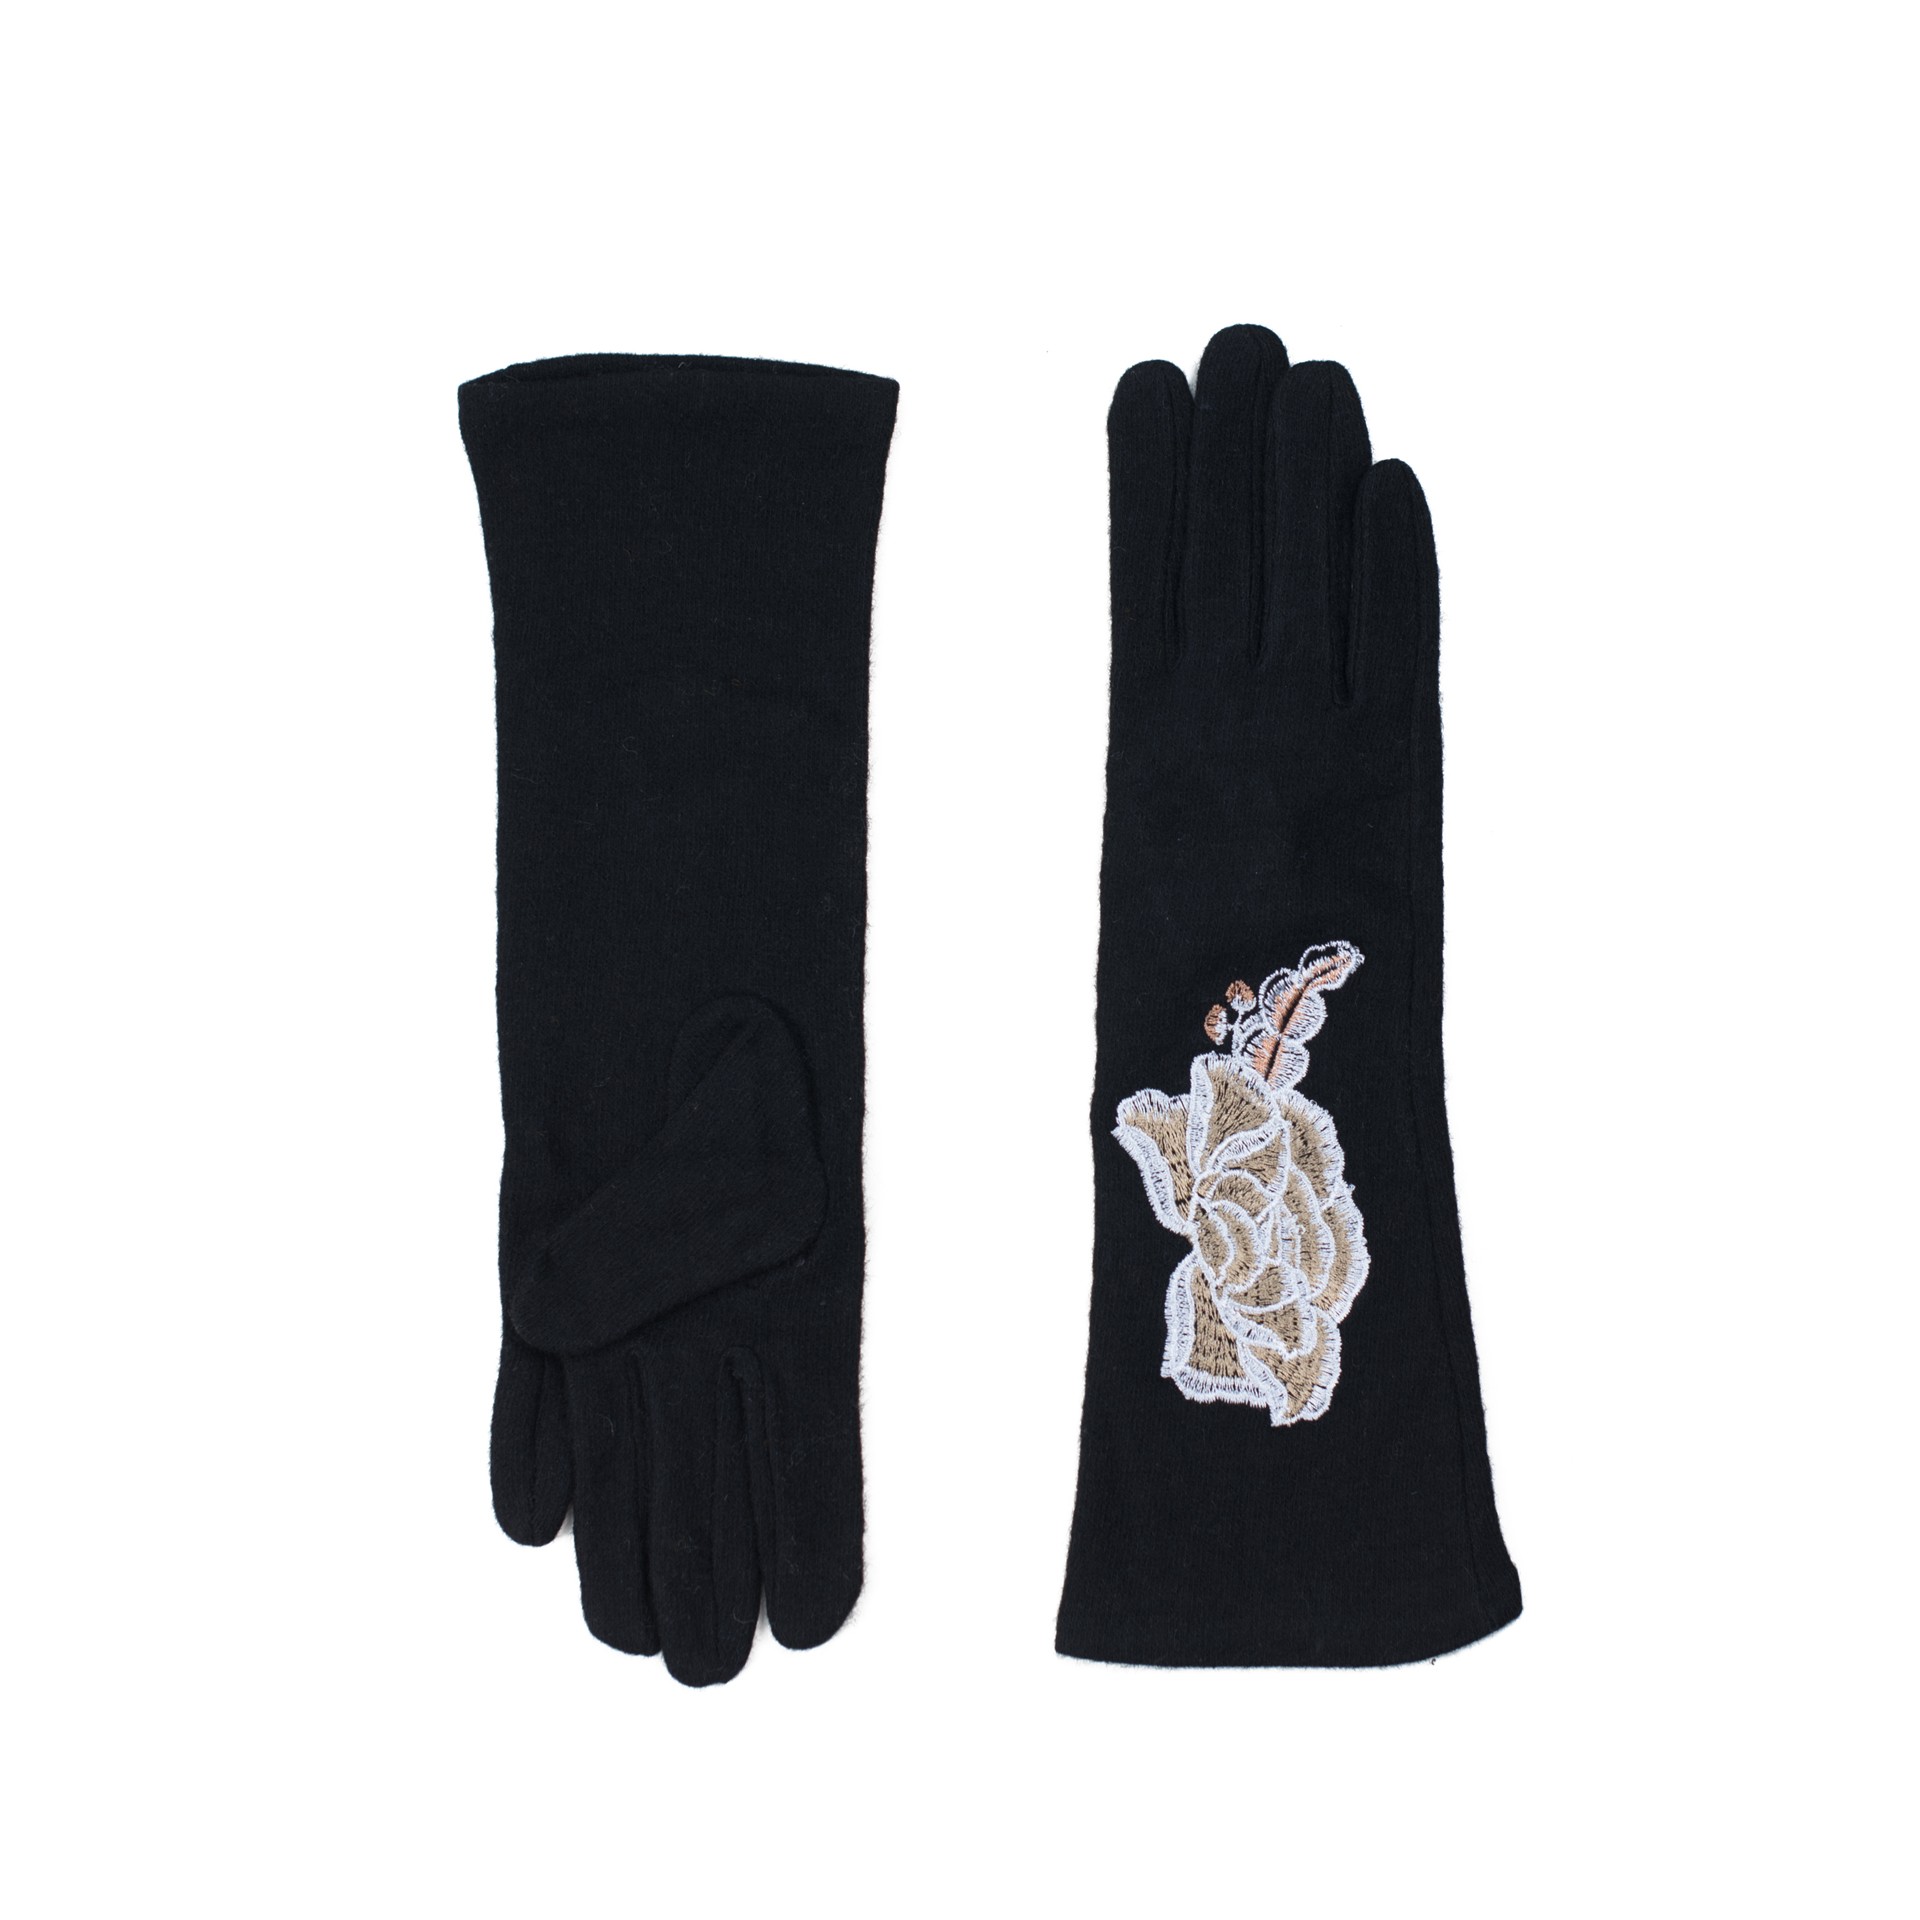 Art Of Polo Woman's Gloves Rk16587